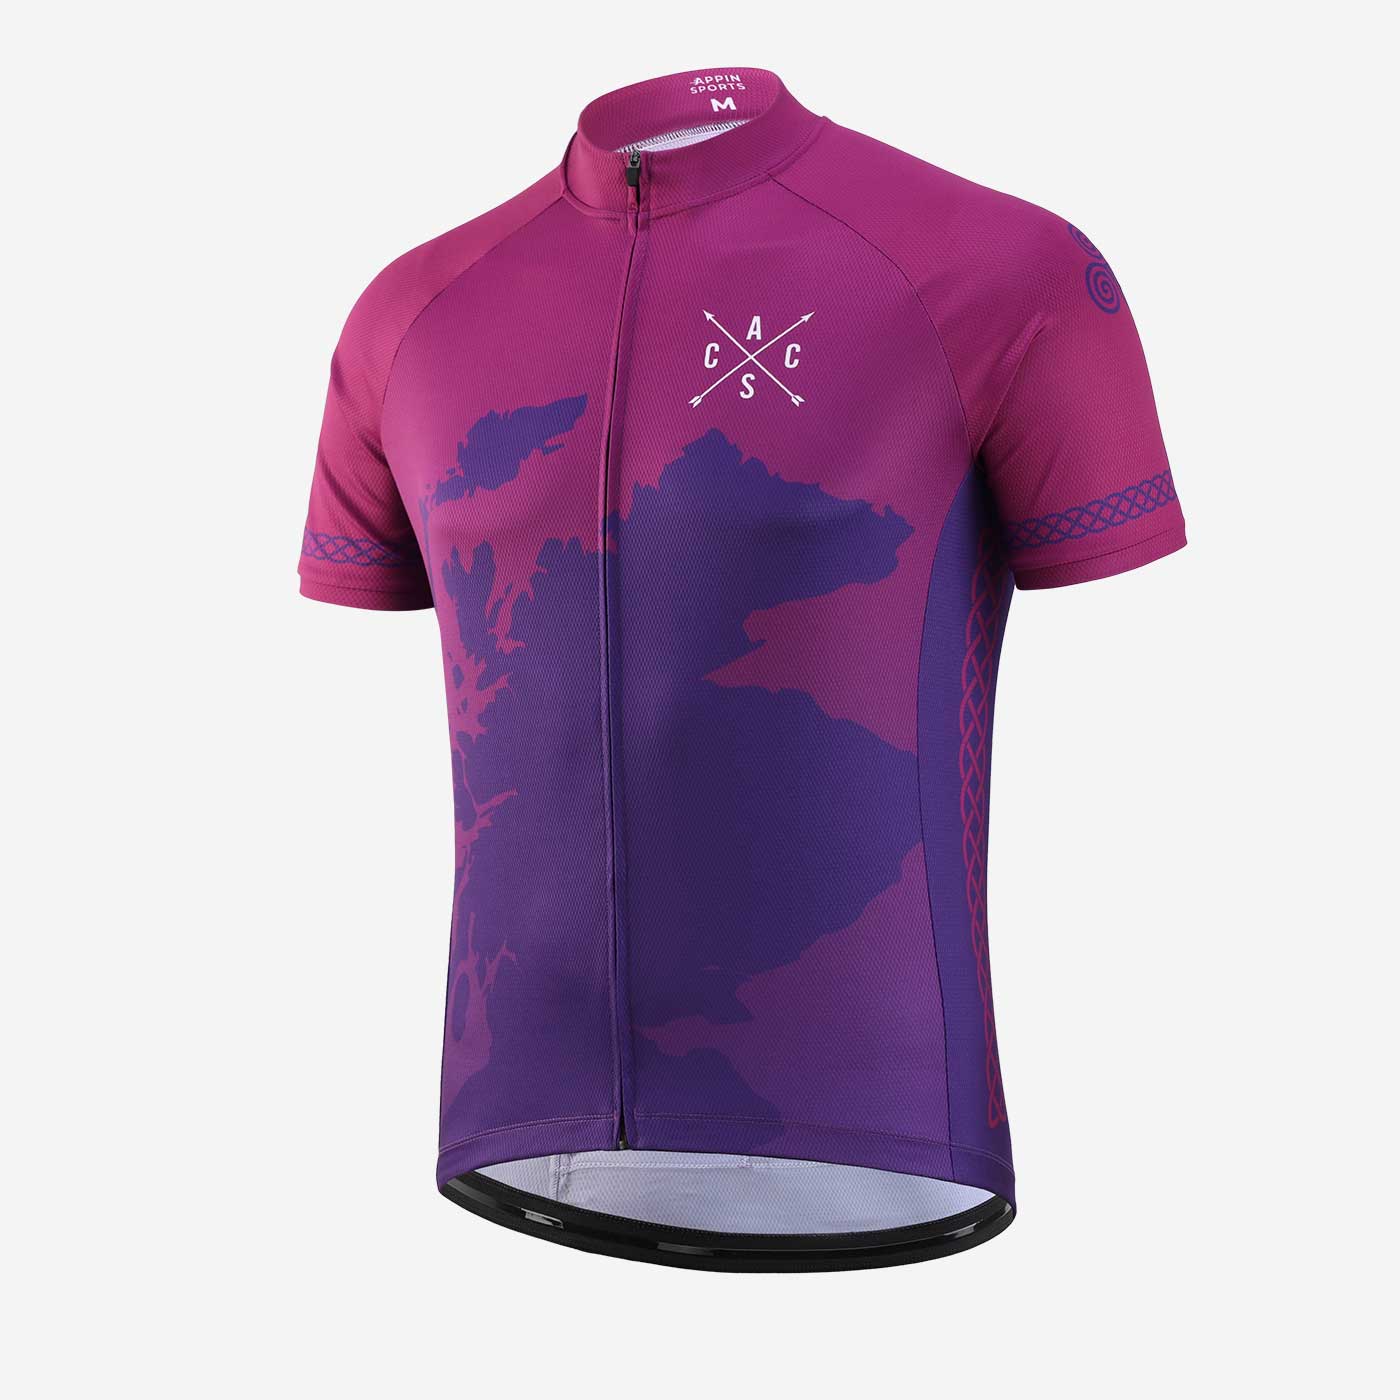 View all cycling jerseys